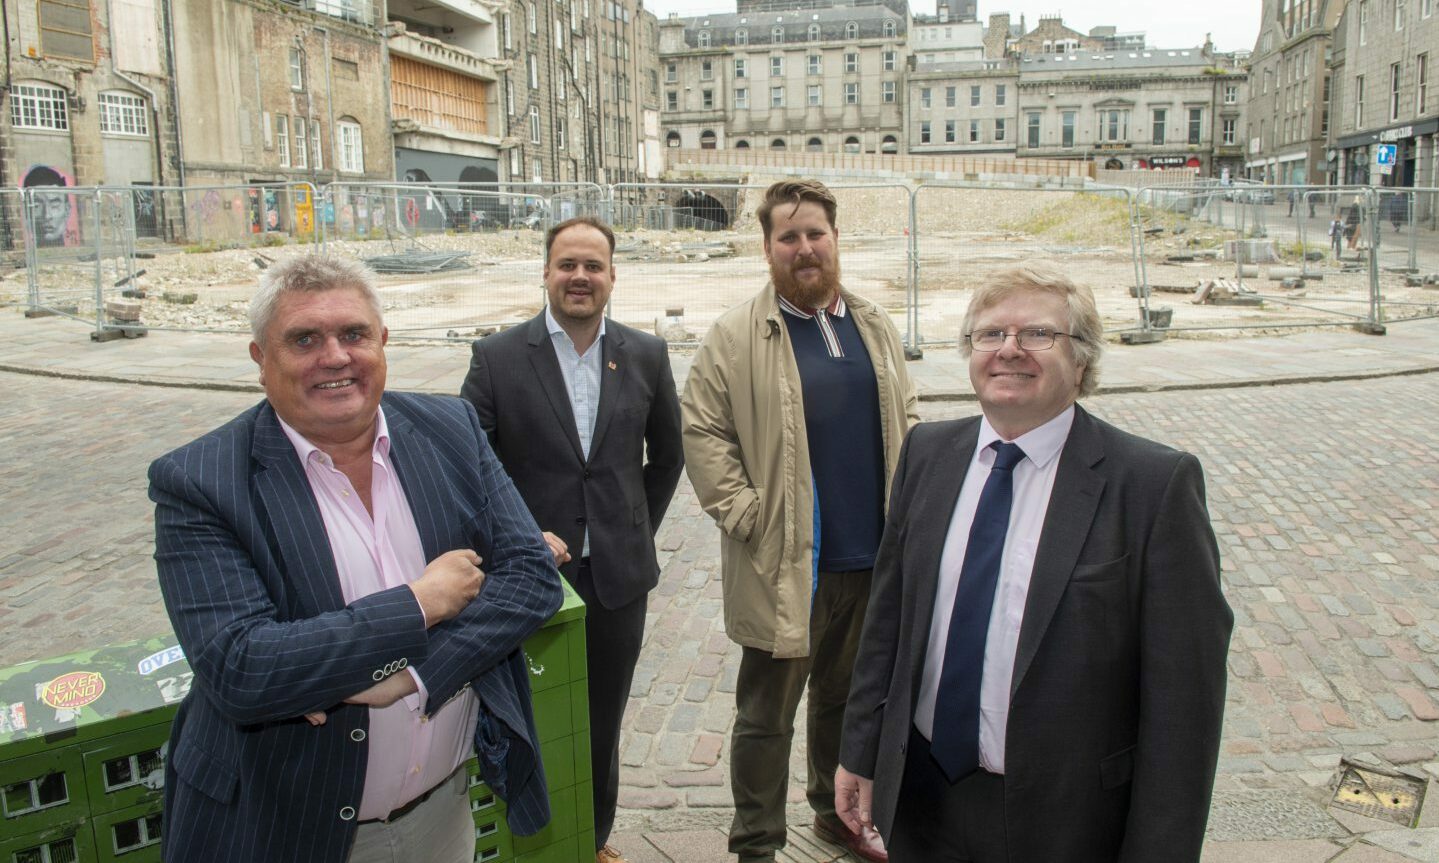 Allan Henderson, director of The McGinty's Group, councillor Ian Yuill, councillor Alex McLellan and Martin Widerlechner, marketing and sales manager at McGinty's. 